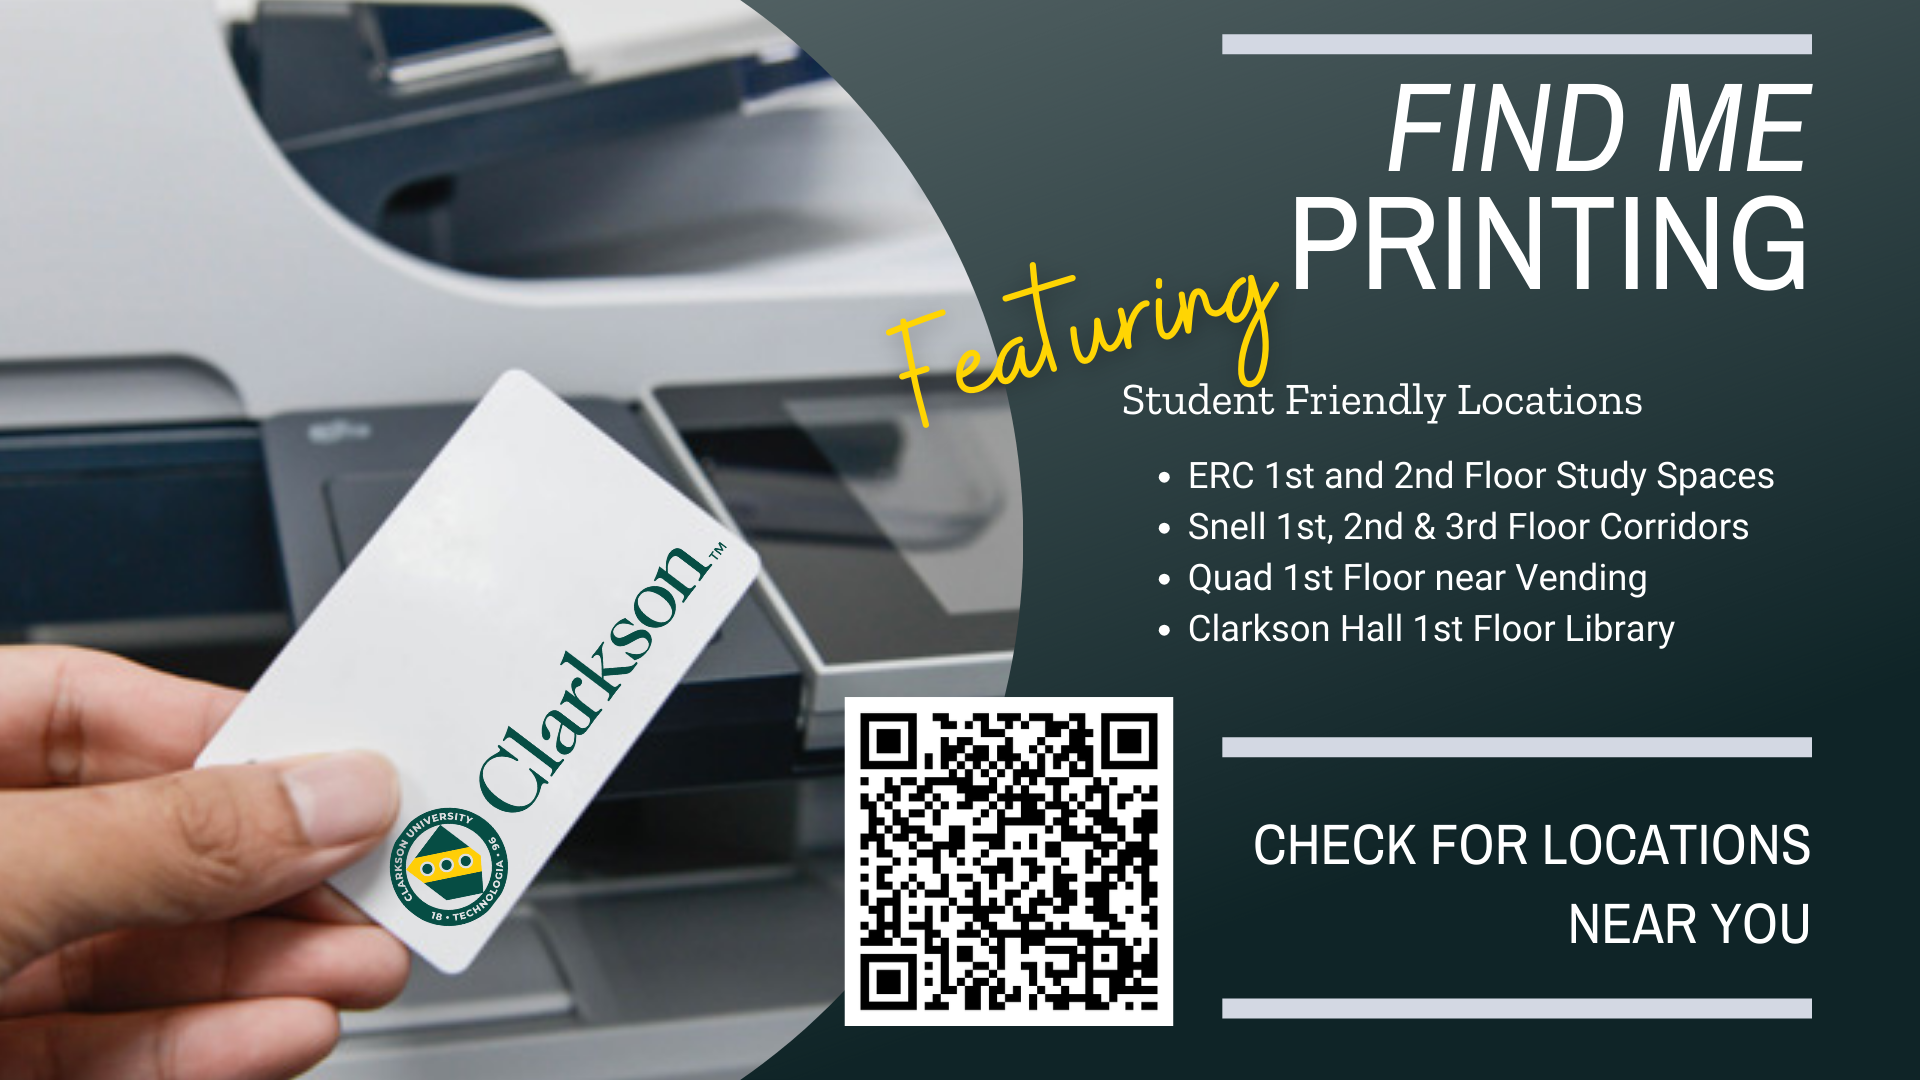 Find Me Printing Student Friendly locations: ERC 1st and 2nd Floor Study Spaces Snell 1st, 2nd & 3rd Floor Corridors Quad 1st Floor near Vending Clarkson Hall 1st Floor Library